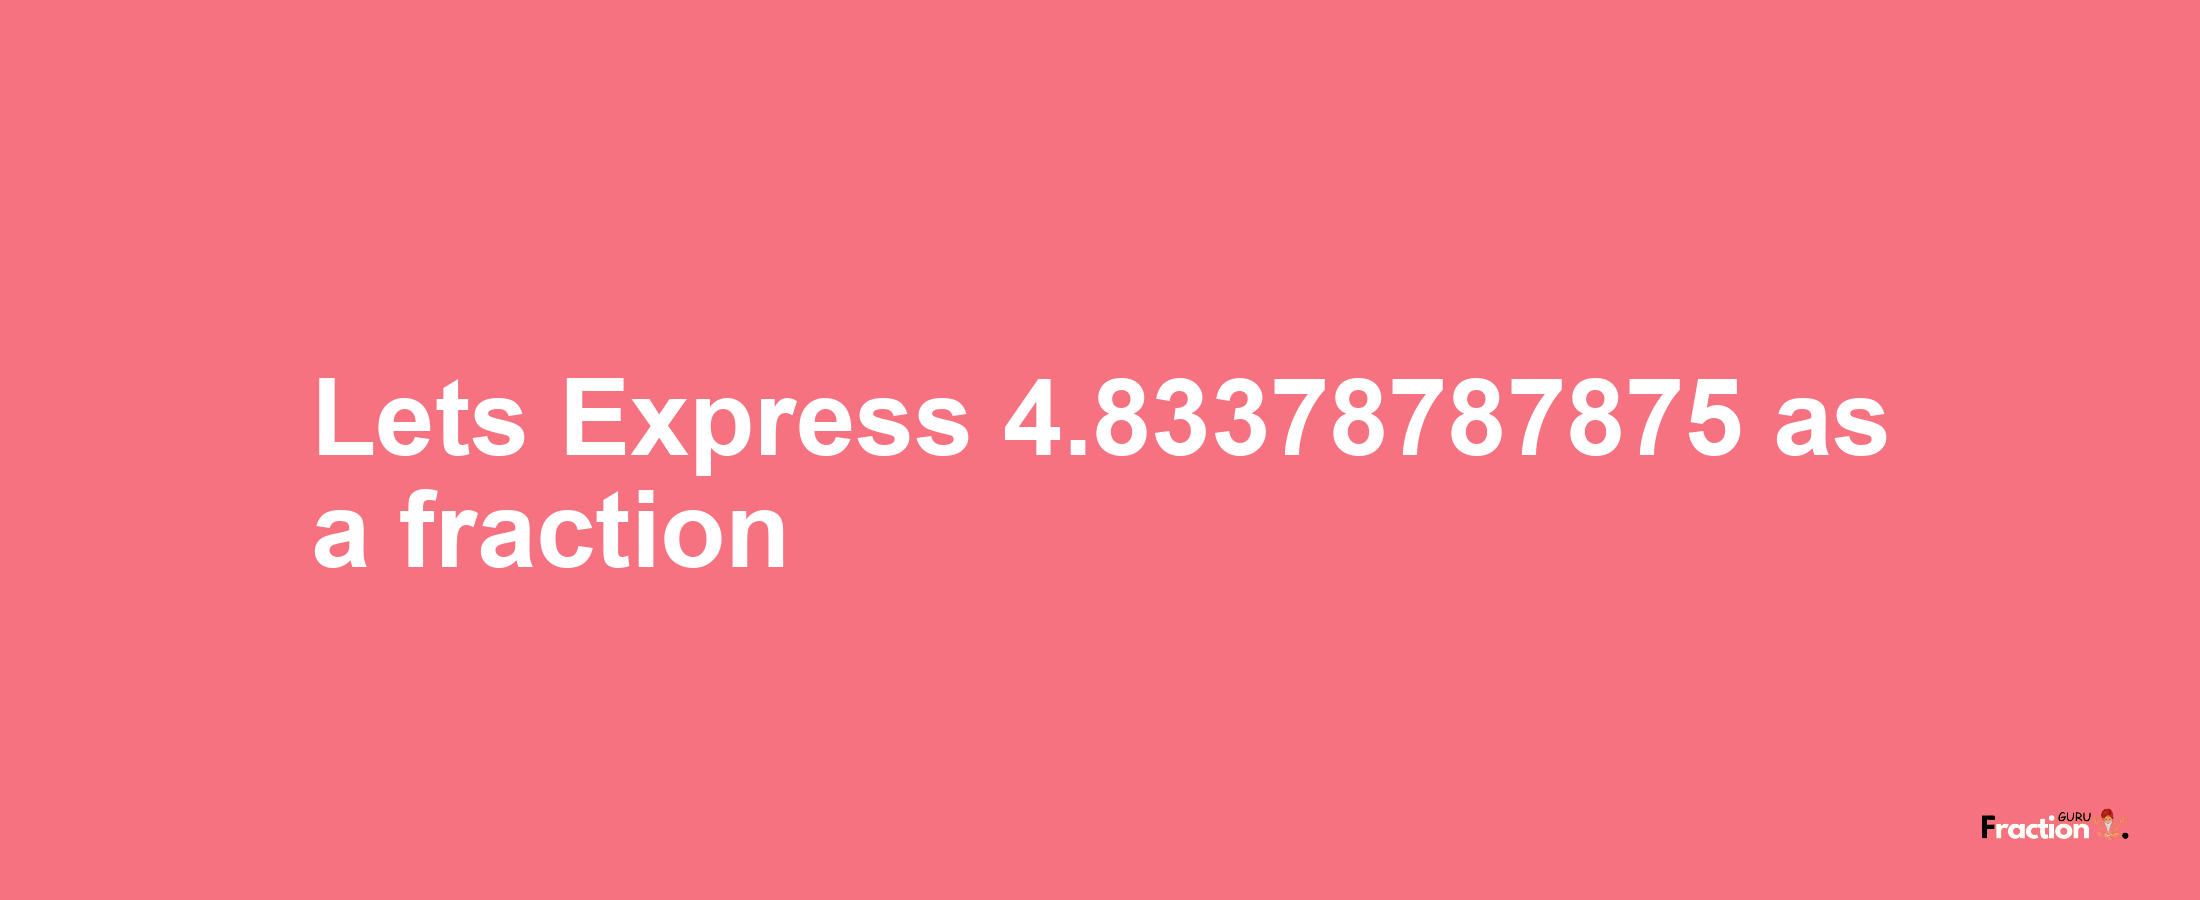 Lets Express 4.83378787875 as afraction